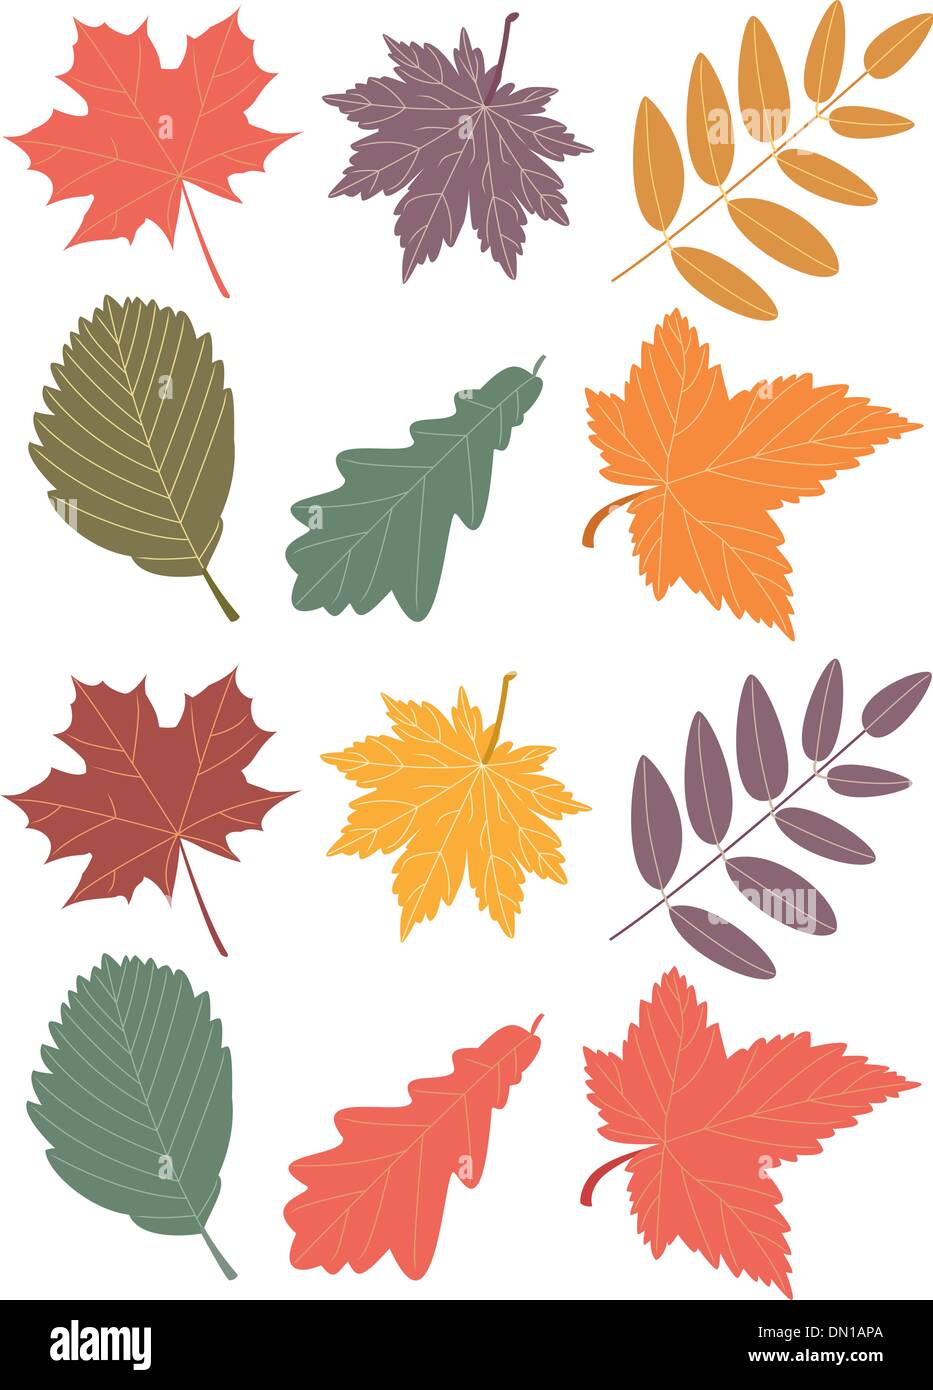 vector fall leaves Stock Vector